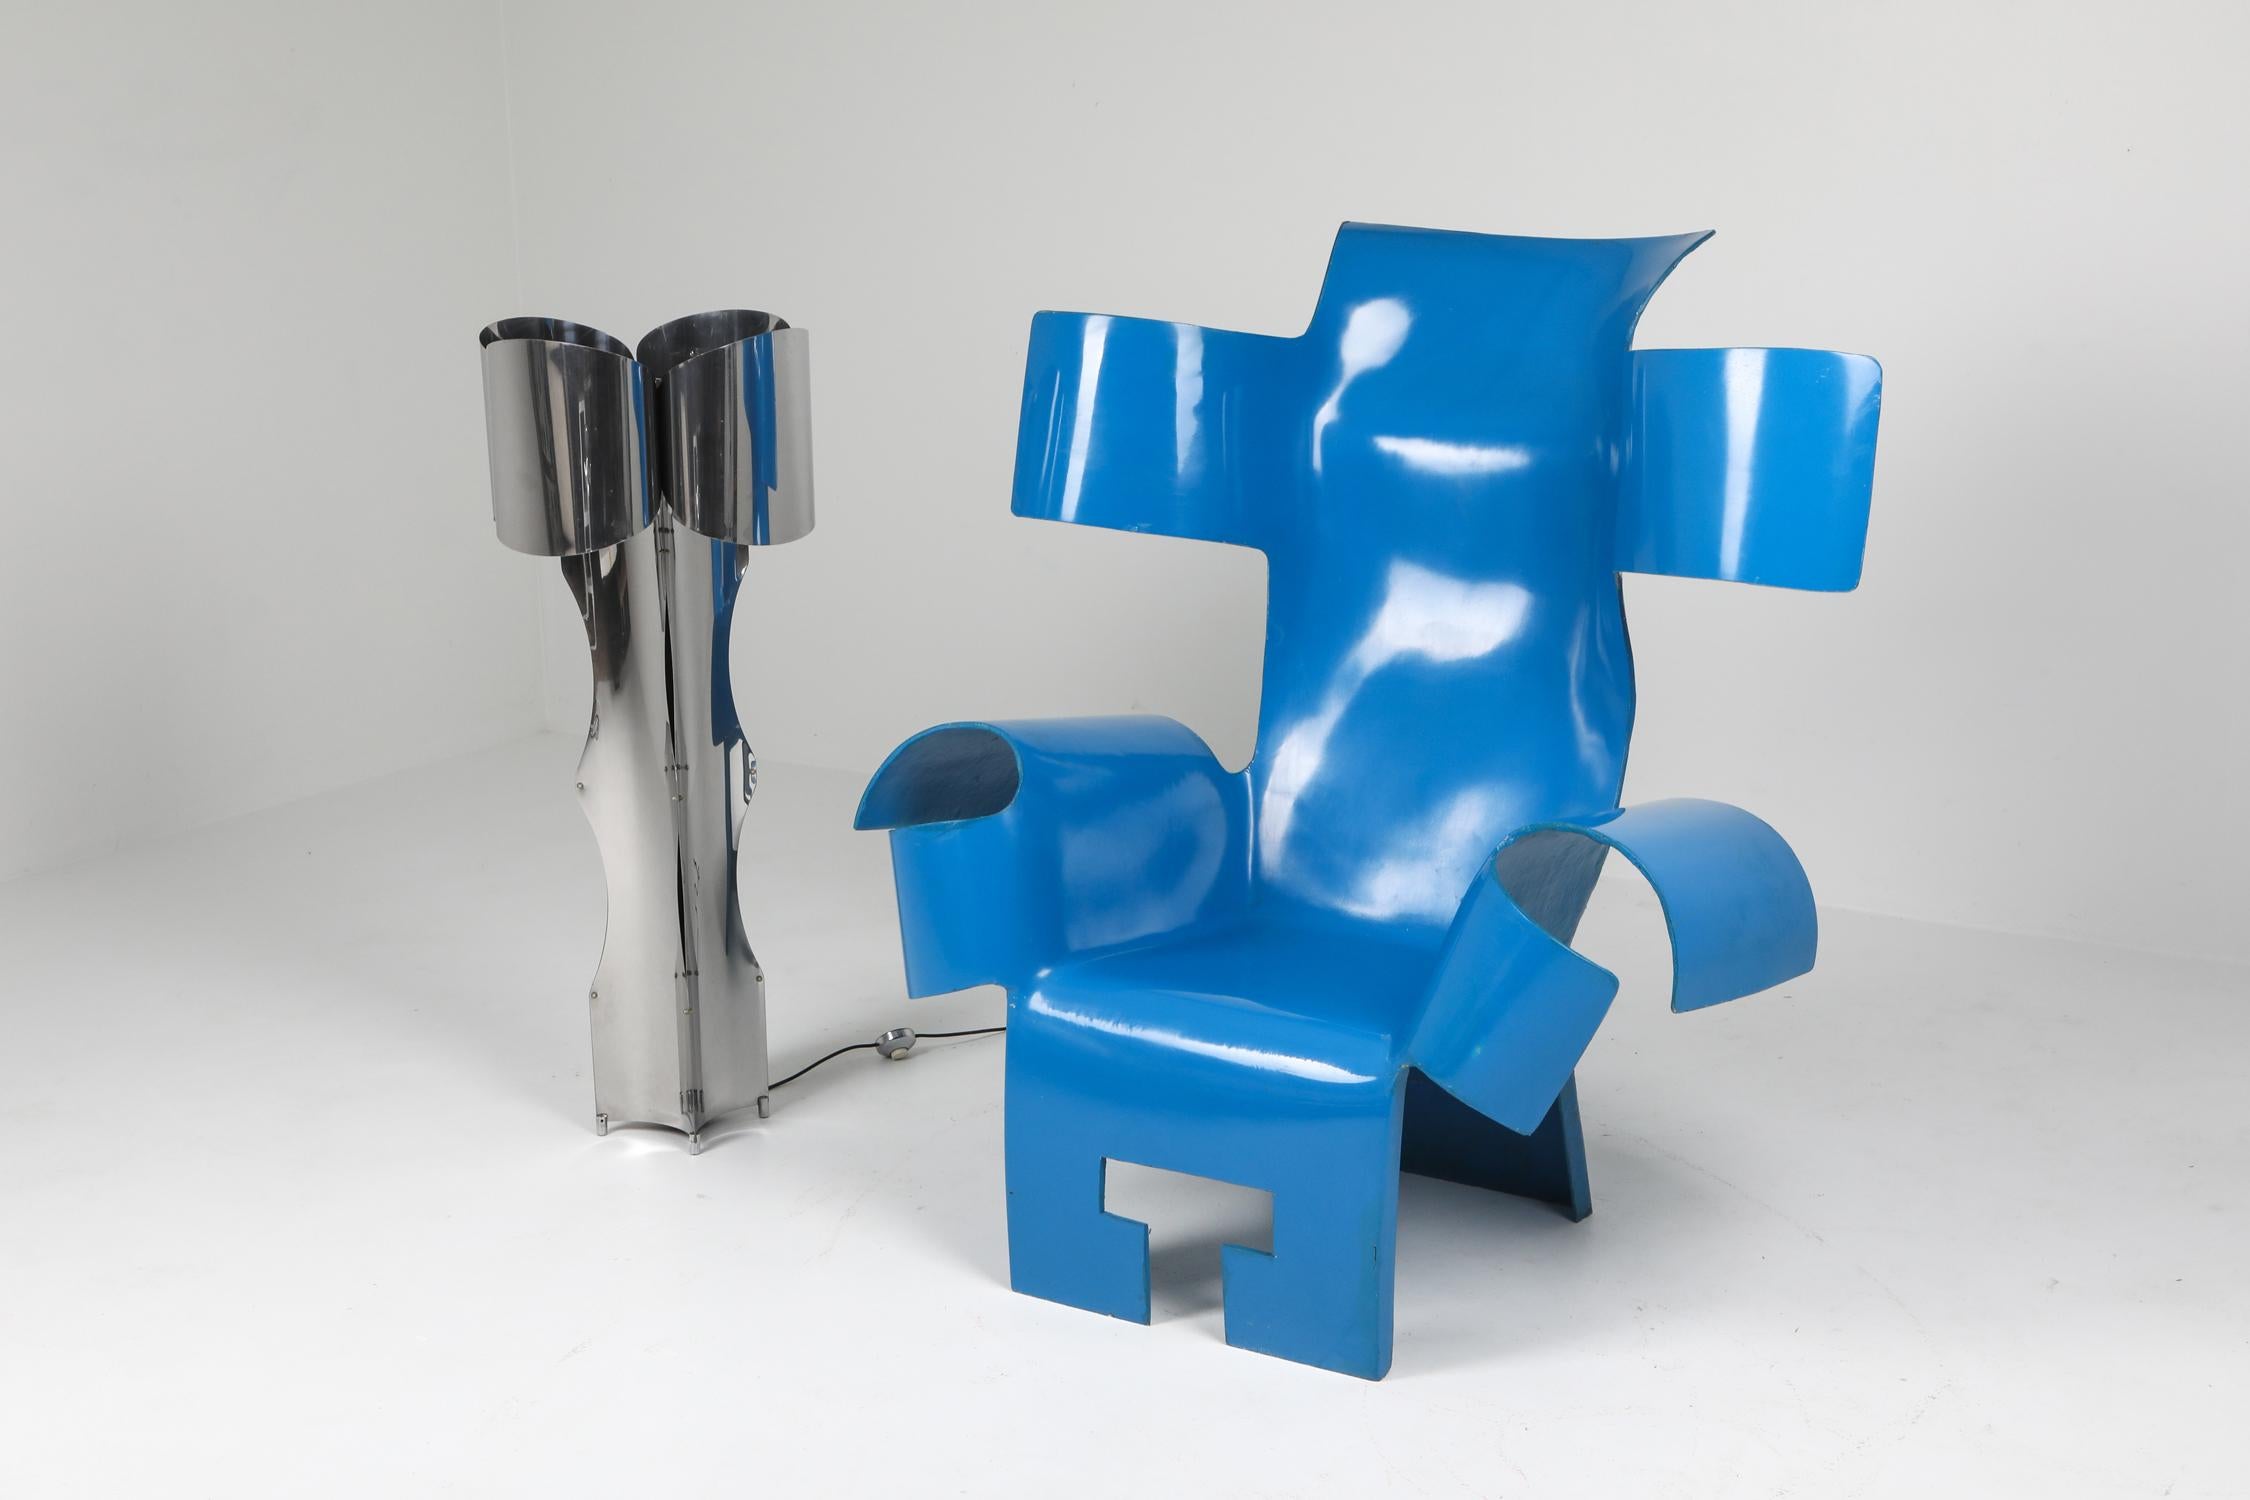 Italian Functional Art Chair in the Style of Gaetano Pesce